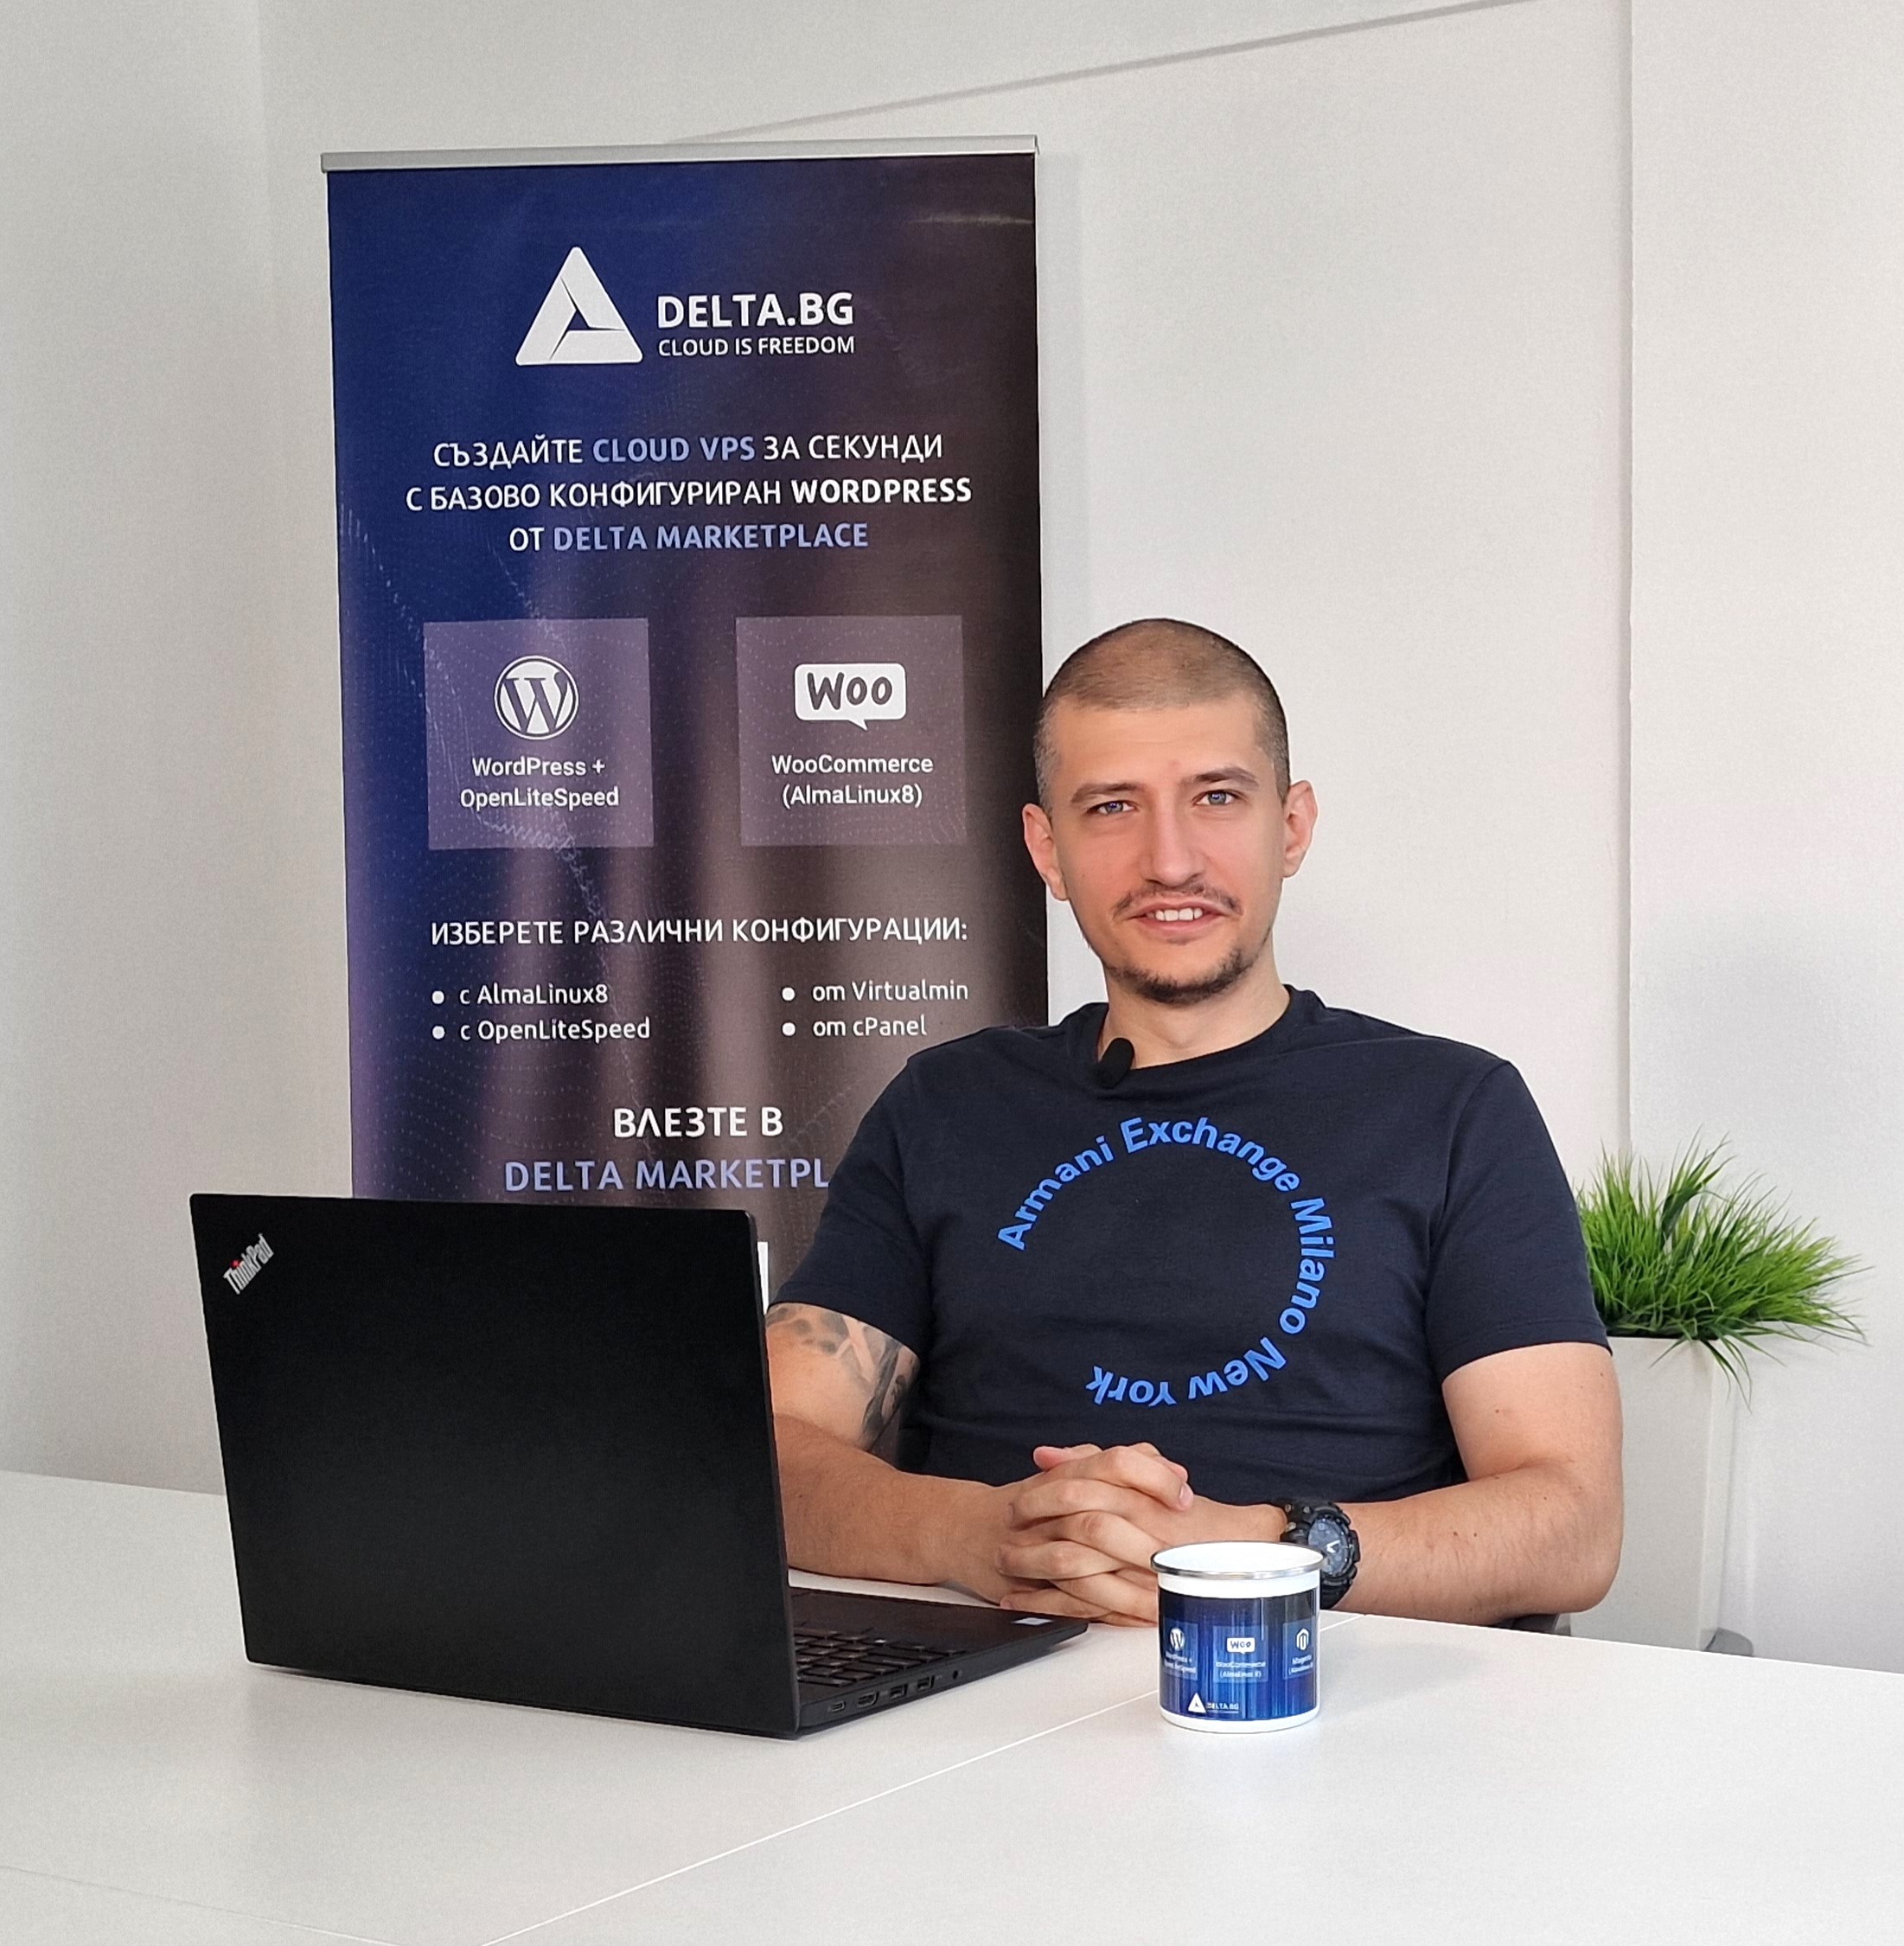 Valentin Dzhorov - co-founder of Hosting Jump and a system administrator at Delta Cloud